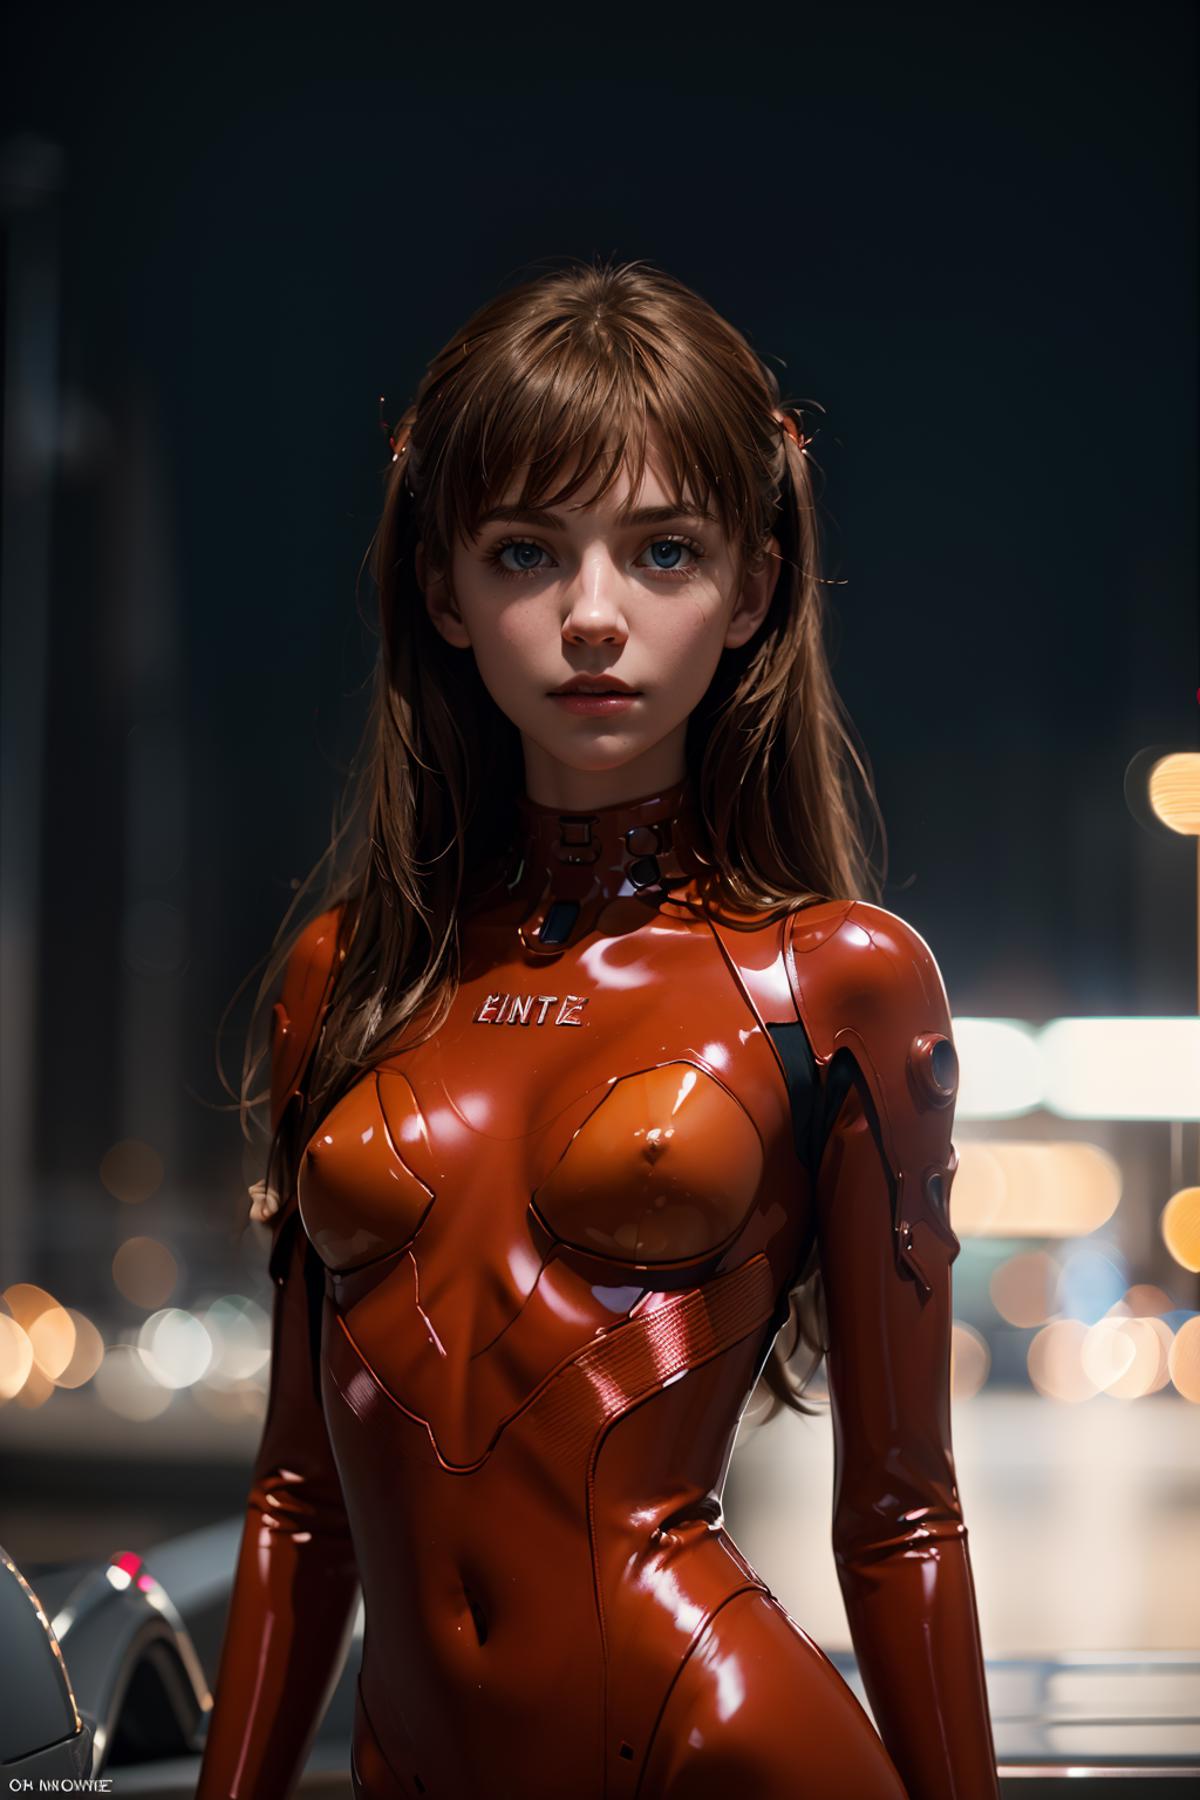 A young woman wearing a red tight bodysuit.